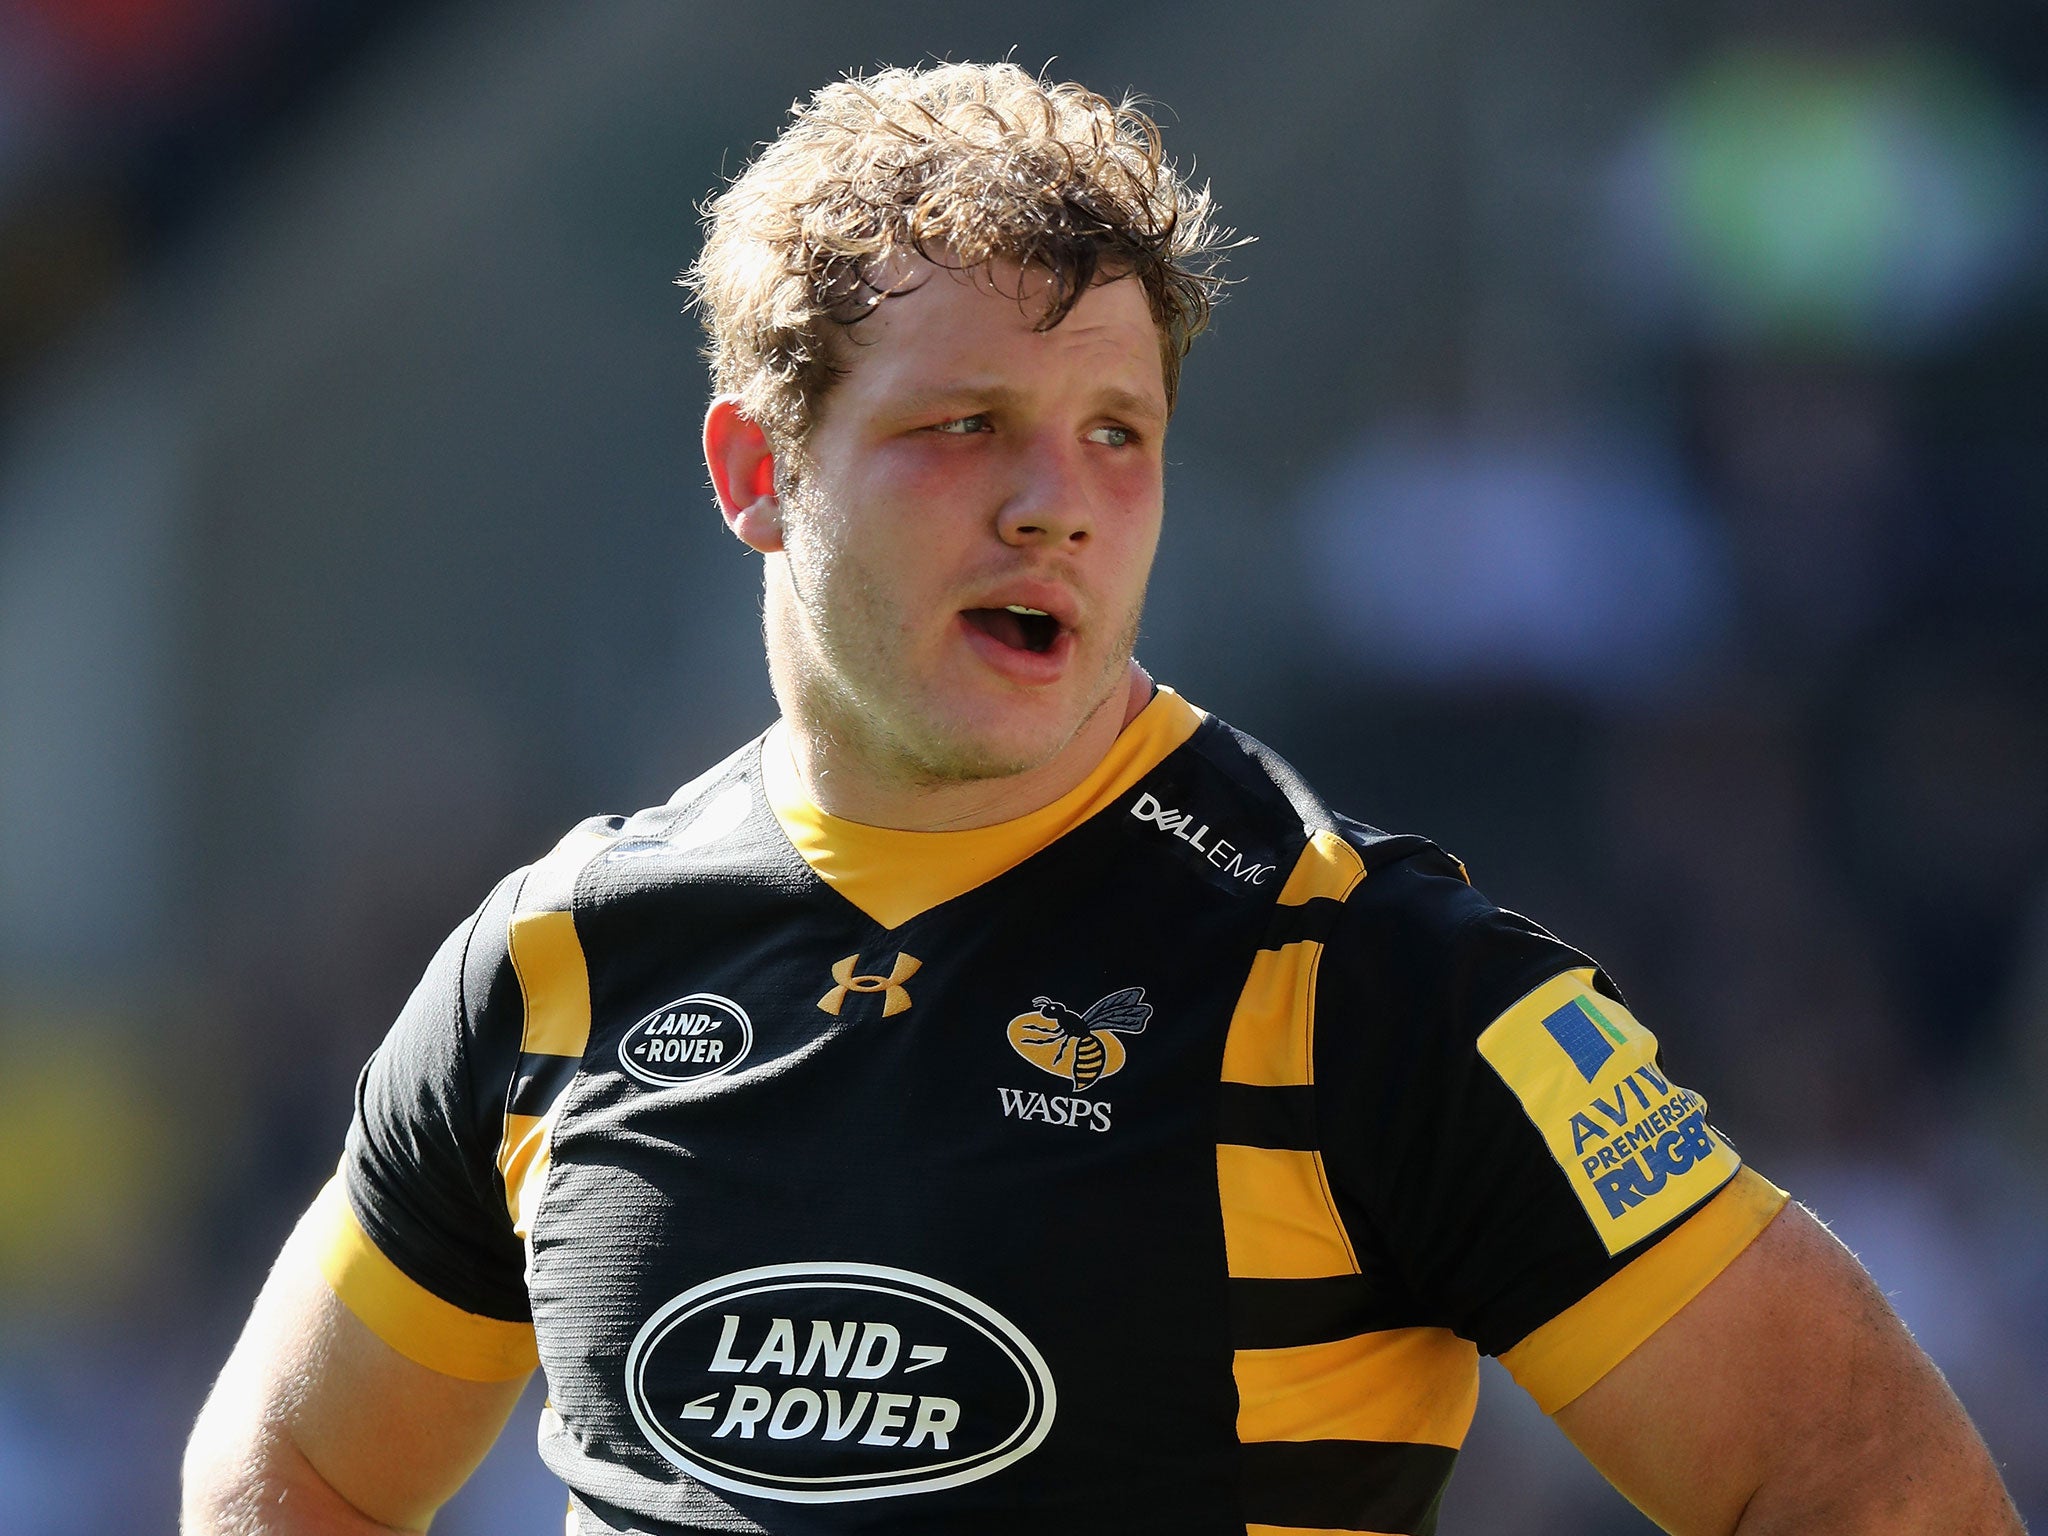 Wasps can still finish third despite heading into the final weekend at the top of the Premiership